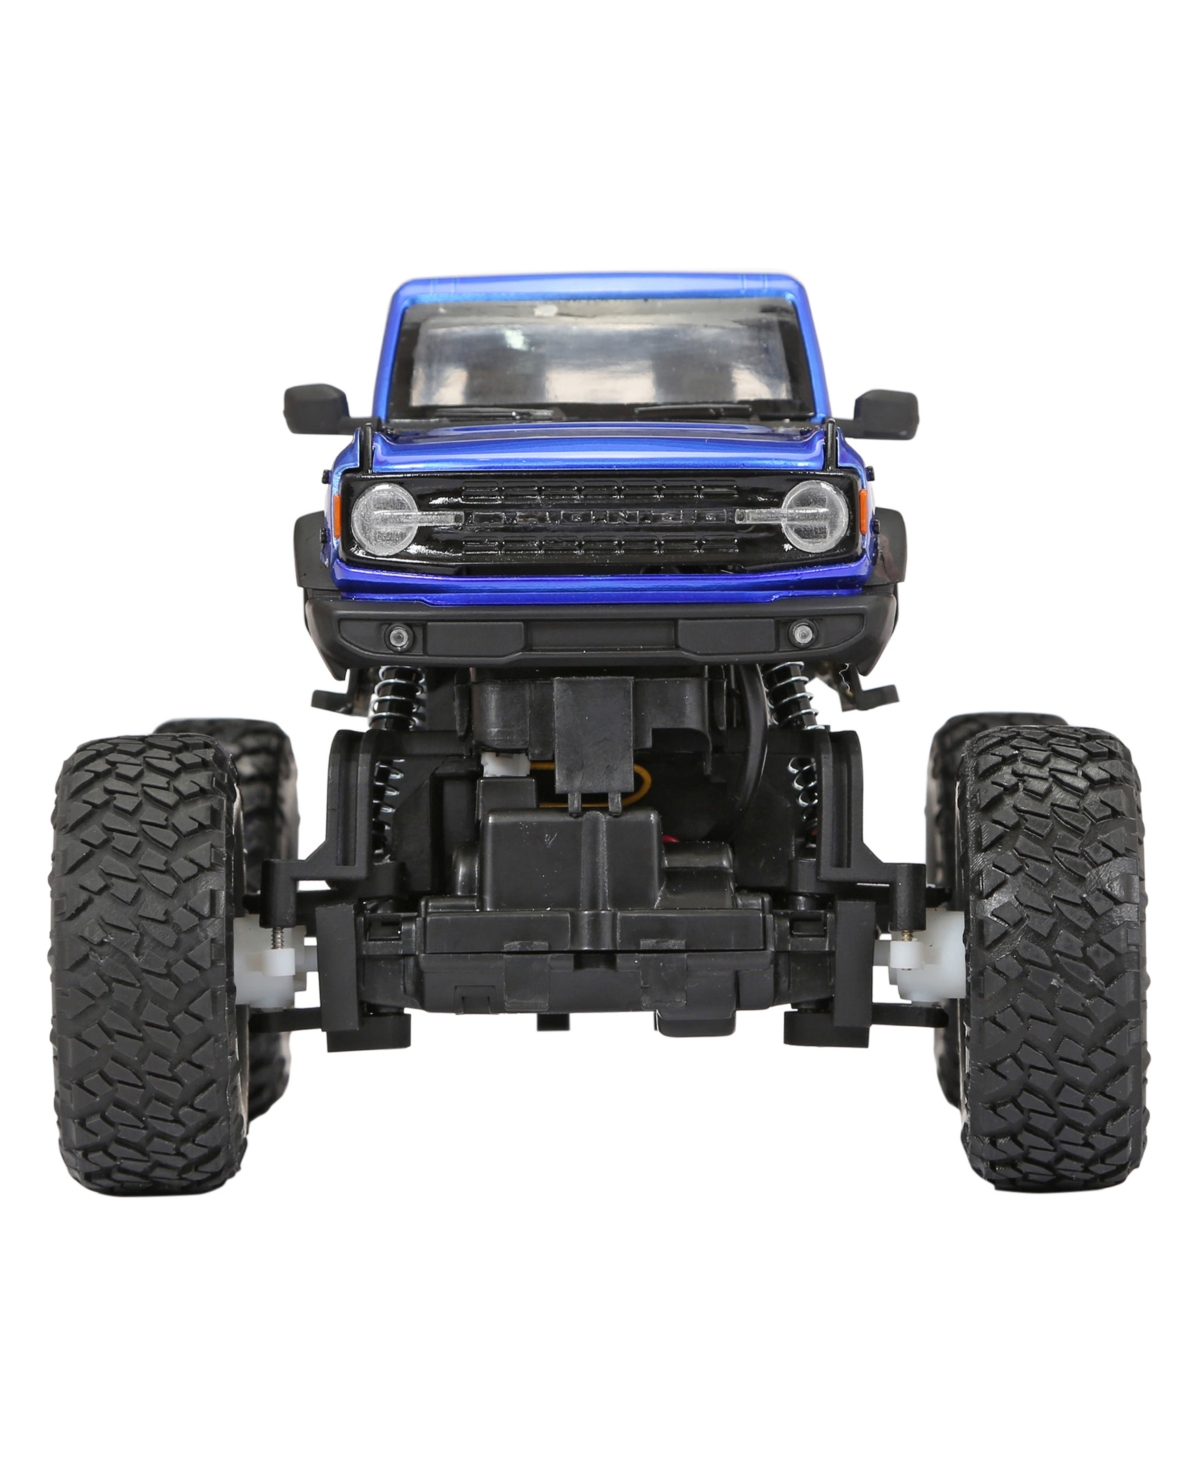 Shop New Bright 1:18 Rc Metal Ford Bronco Truck In Blue